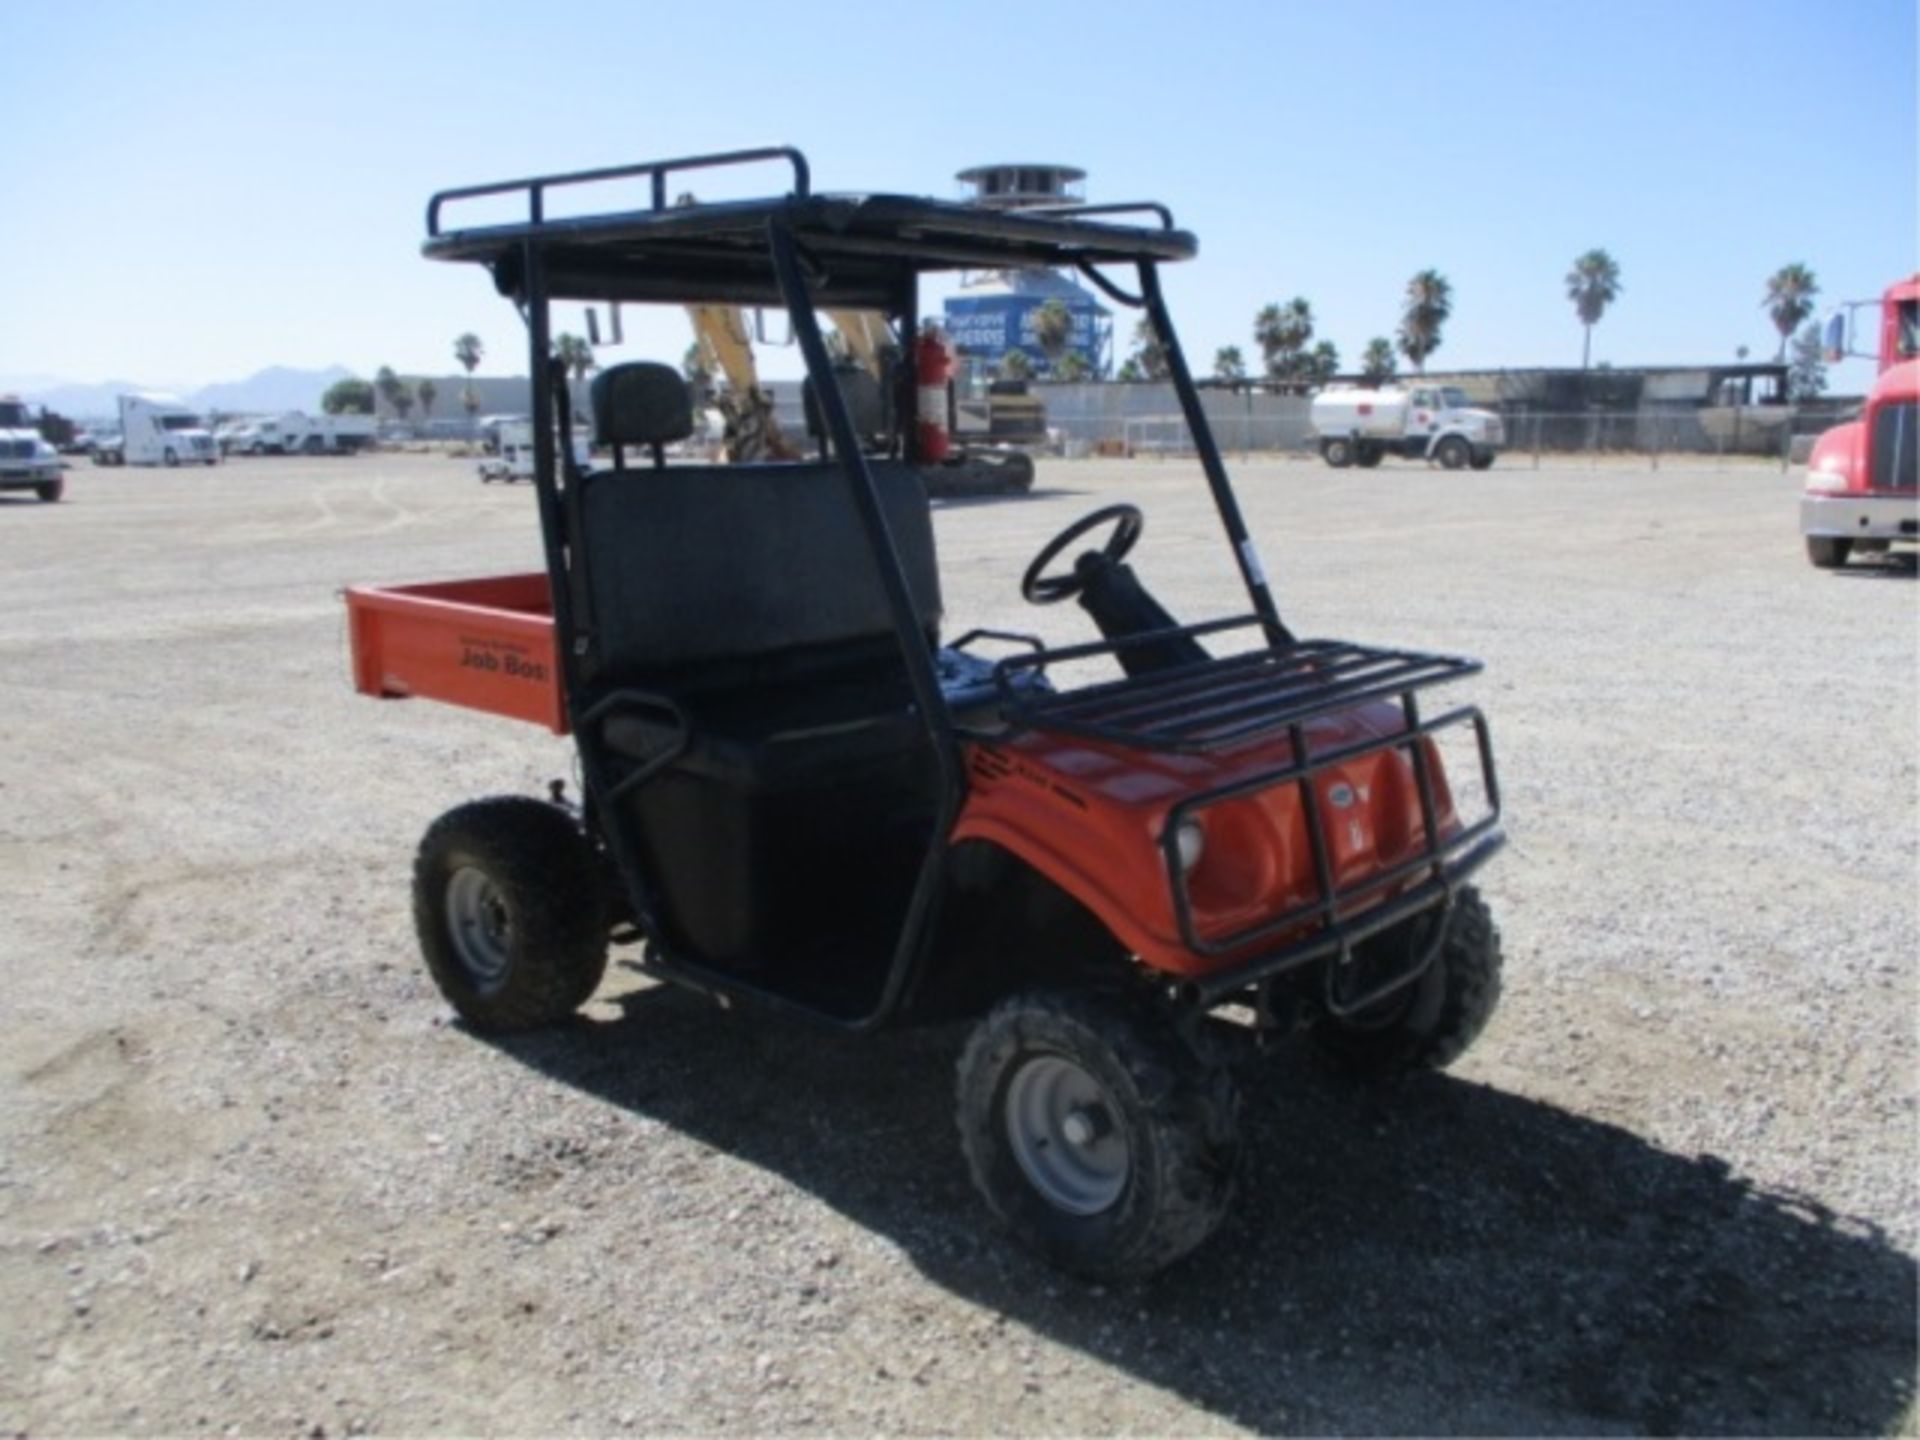 2008 American Sportworks Job Boss Utility Cart, Honda Gas, Rear Metal Dump Bed, Canopy, Tow Hitch, - Image 6 of 50